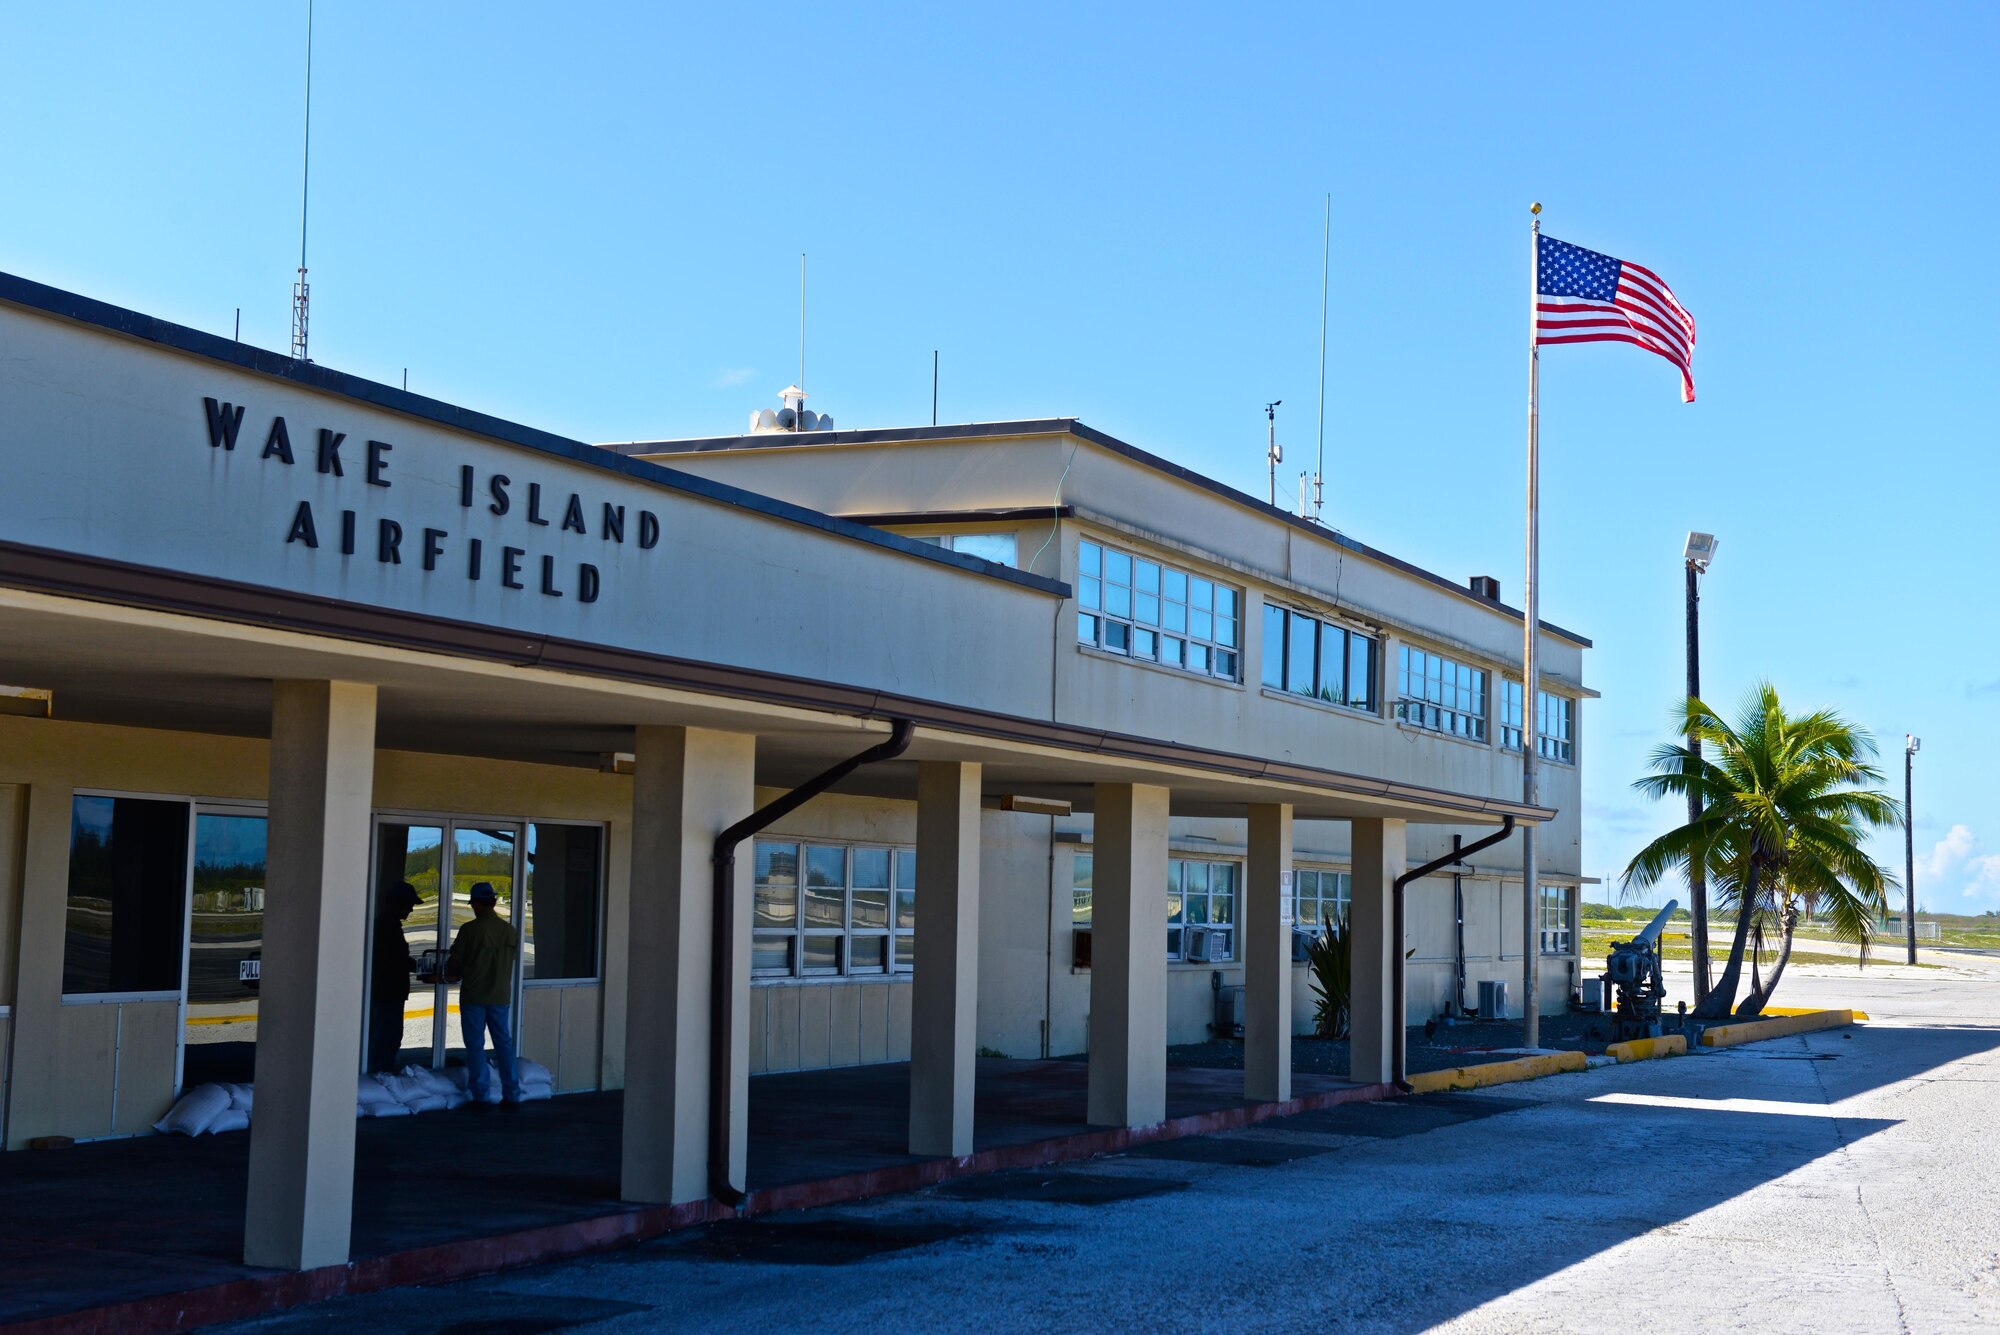 A contractor assigned to Wake Island Airfield opens the passenger terminal building July 20, 2015, after a typhoon hit the small atoll and forced the entire staff to evacuate the island a few days earlier. A team with the 36th Contingency Response Group at Andersen Air Force Base, Guam, deployed to the atoll to assist in airfield storm recovery efforts. (U.S. Air Force photo by Senior Airman Alexander W. Riedel/Released)
